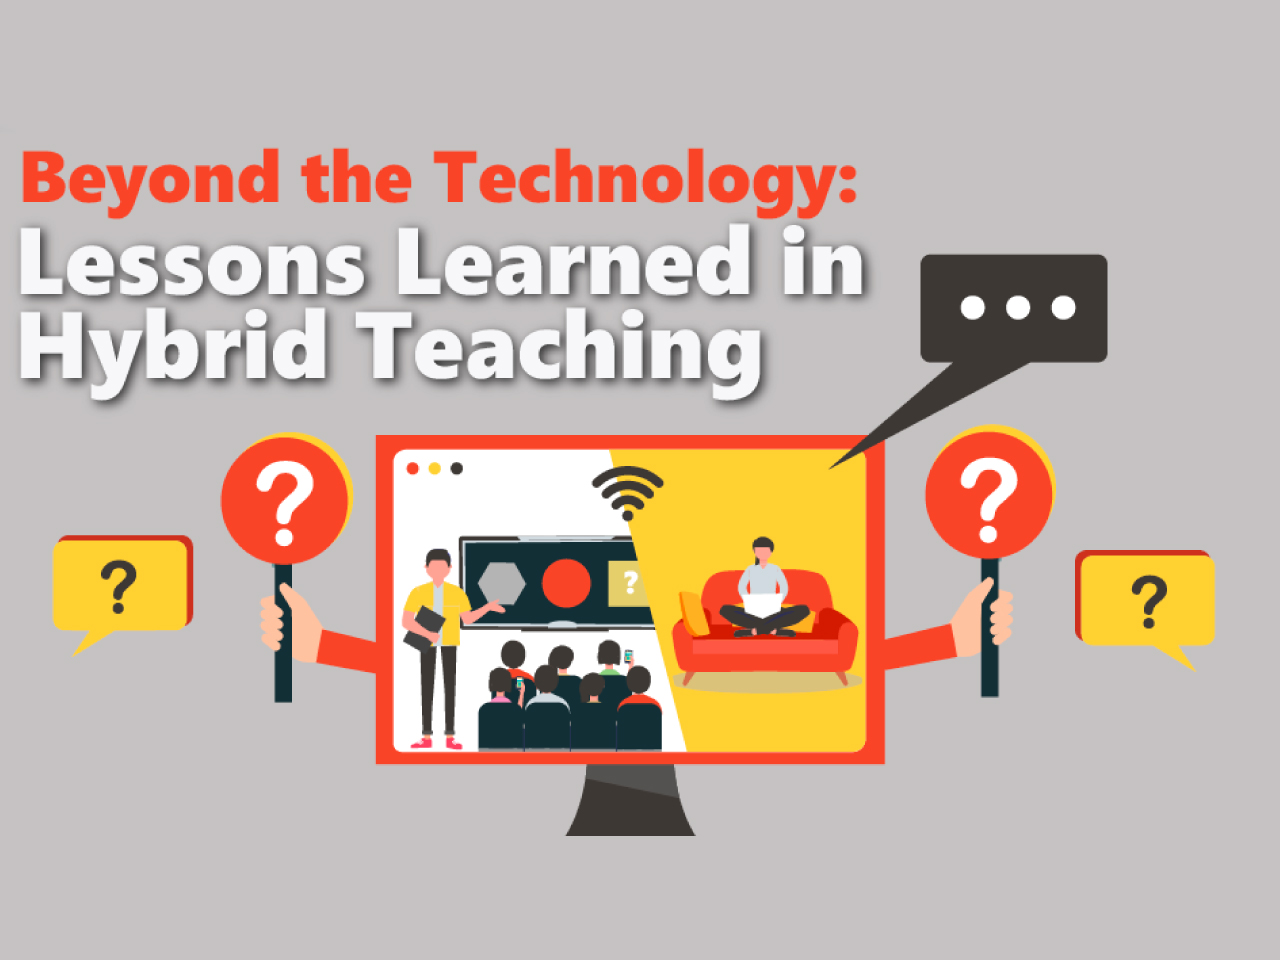 Beyond the Technology - Lessons Learned in Hybrid Teaching: 21 October